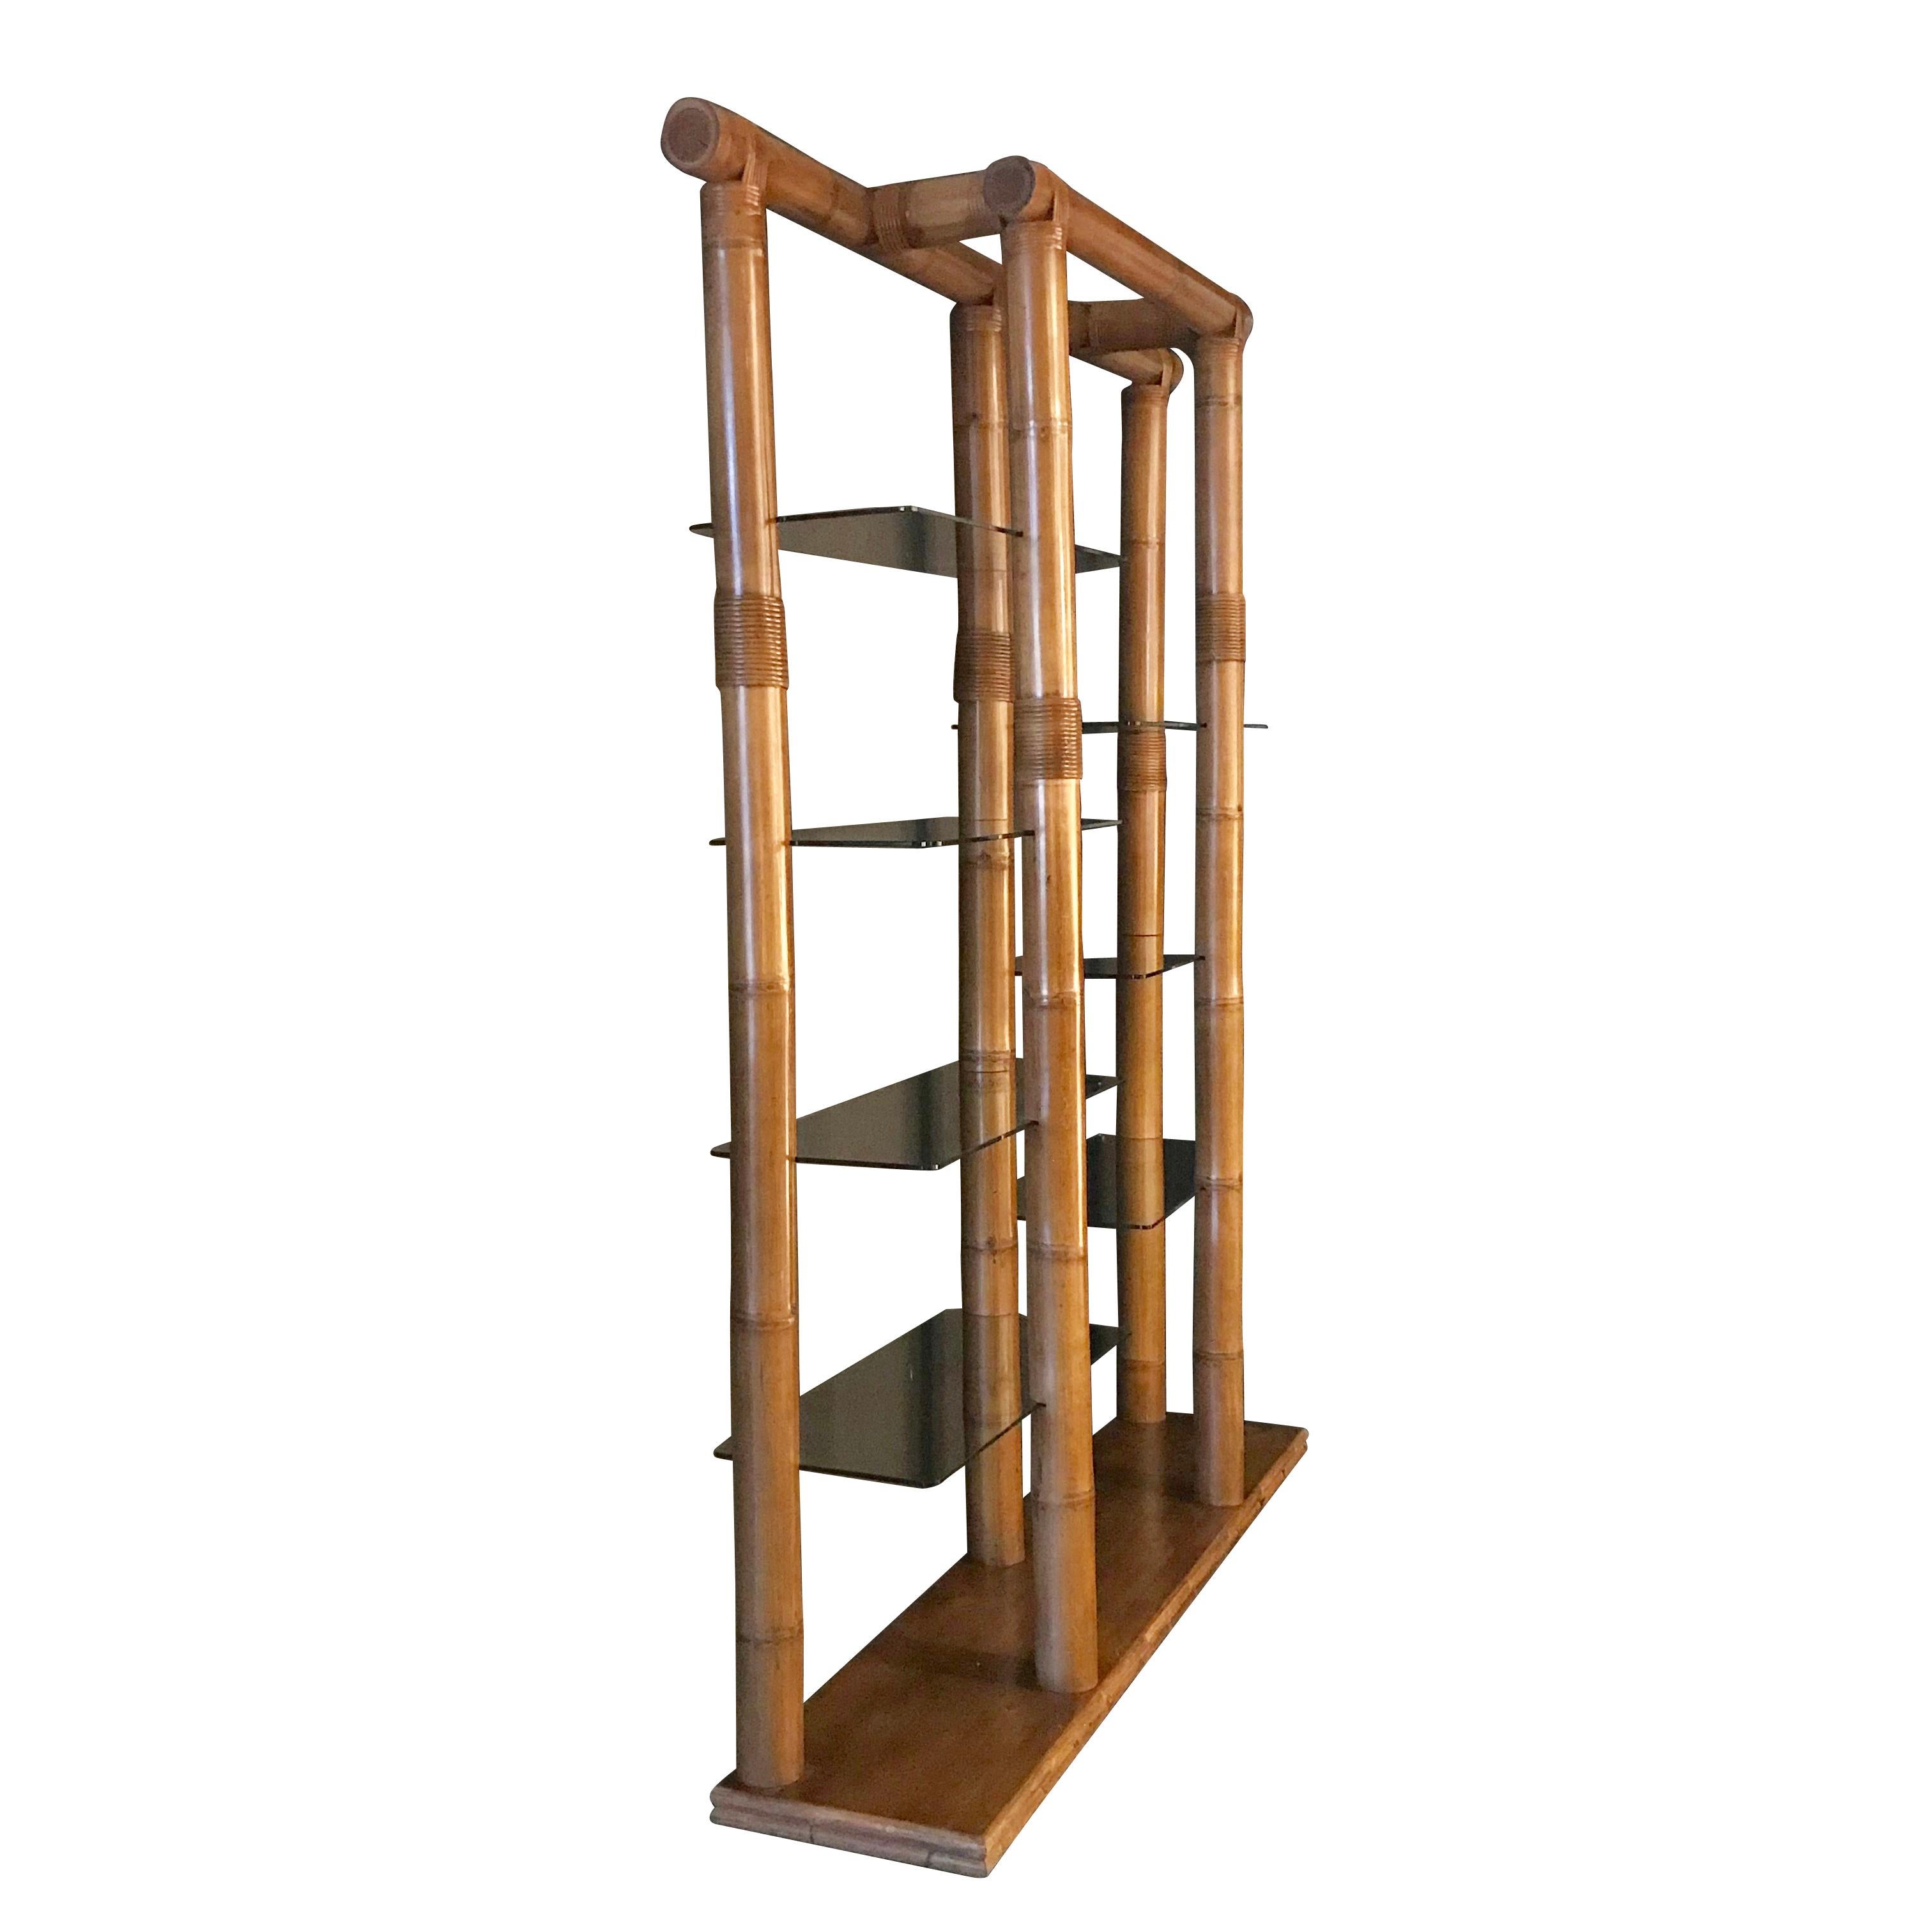 1960s French very unusual Maison Jansen bamboo and glass shelved étagère.
Seven glass shelves measuring 15